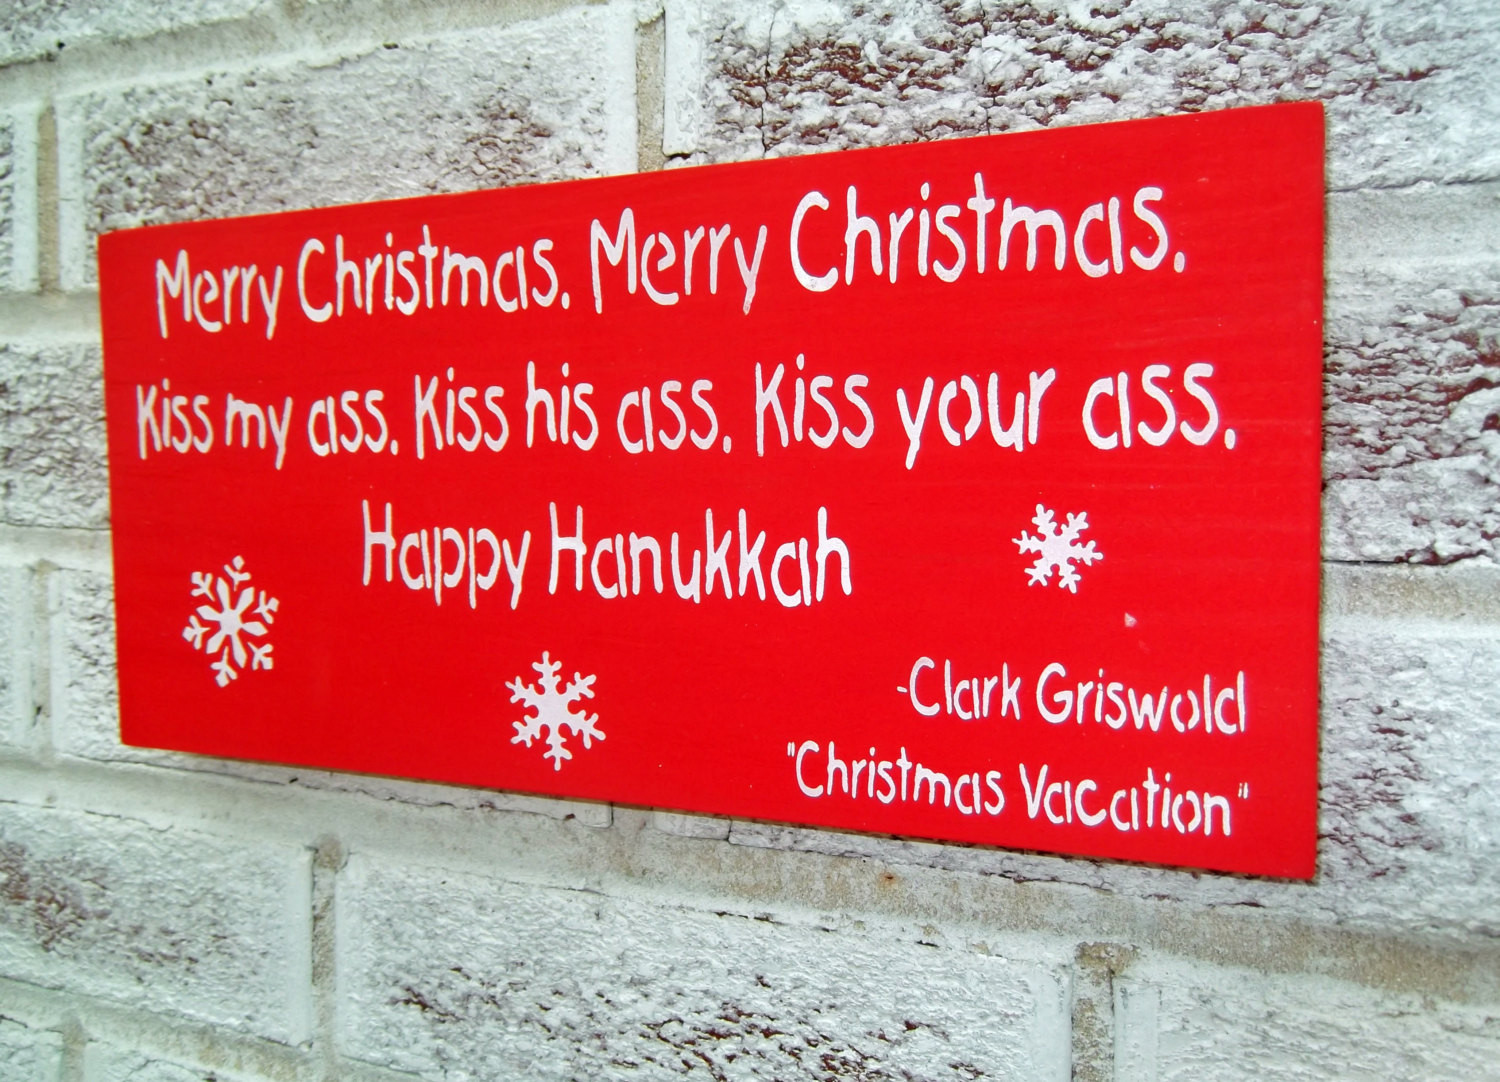 Clark Griswold Christmas Vacation Quotes
 Items similar to Clark Griswold Christmas Vacation quote